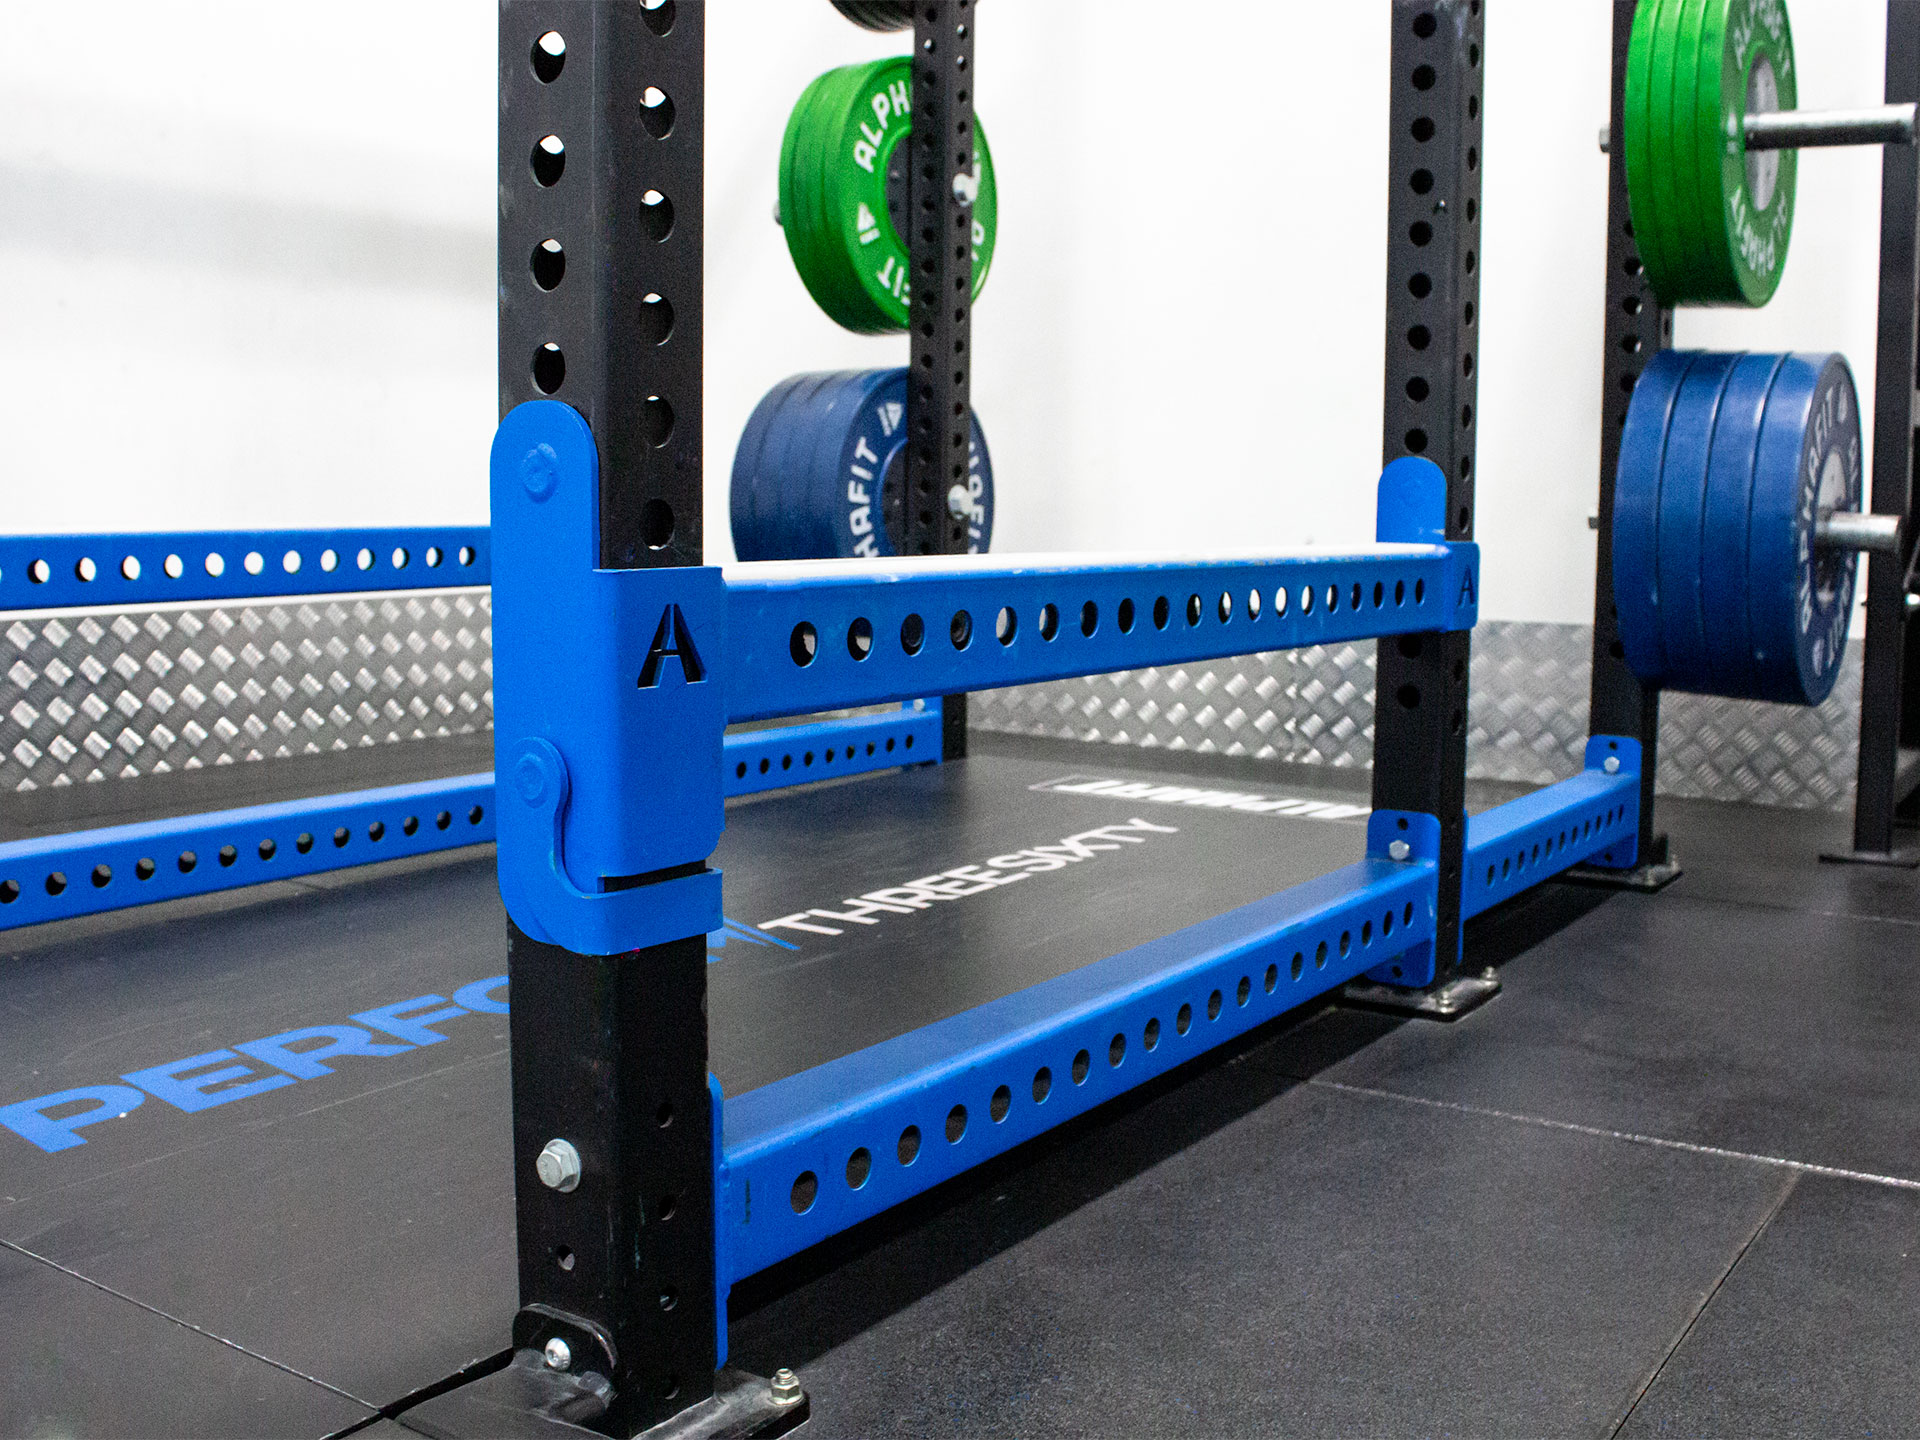 Perform 360 Strength and Conditioning Gym Fitout